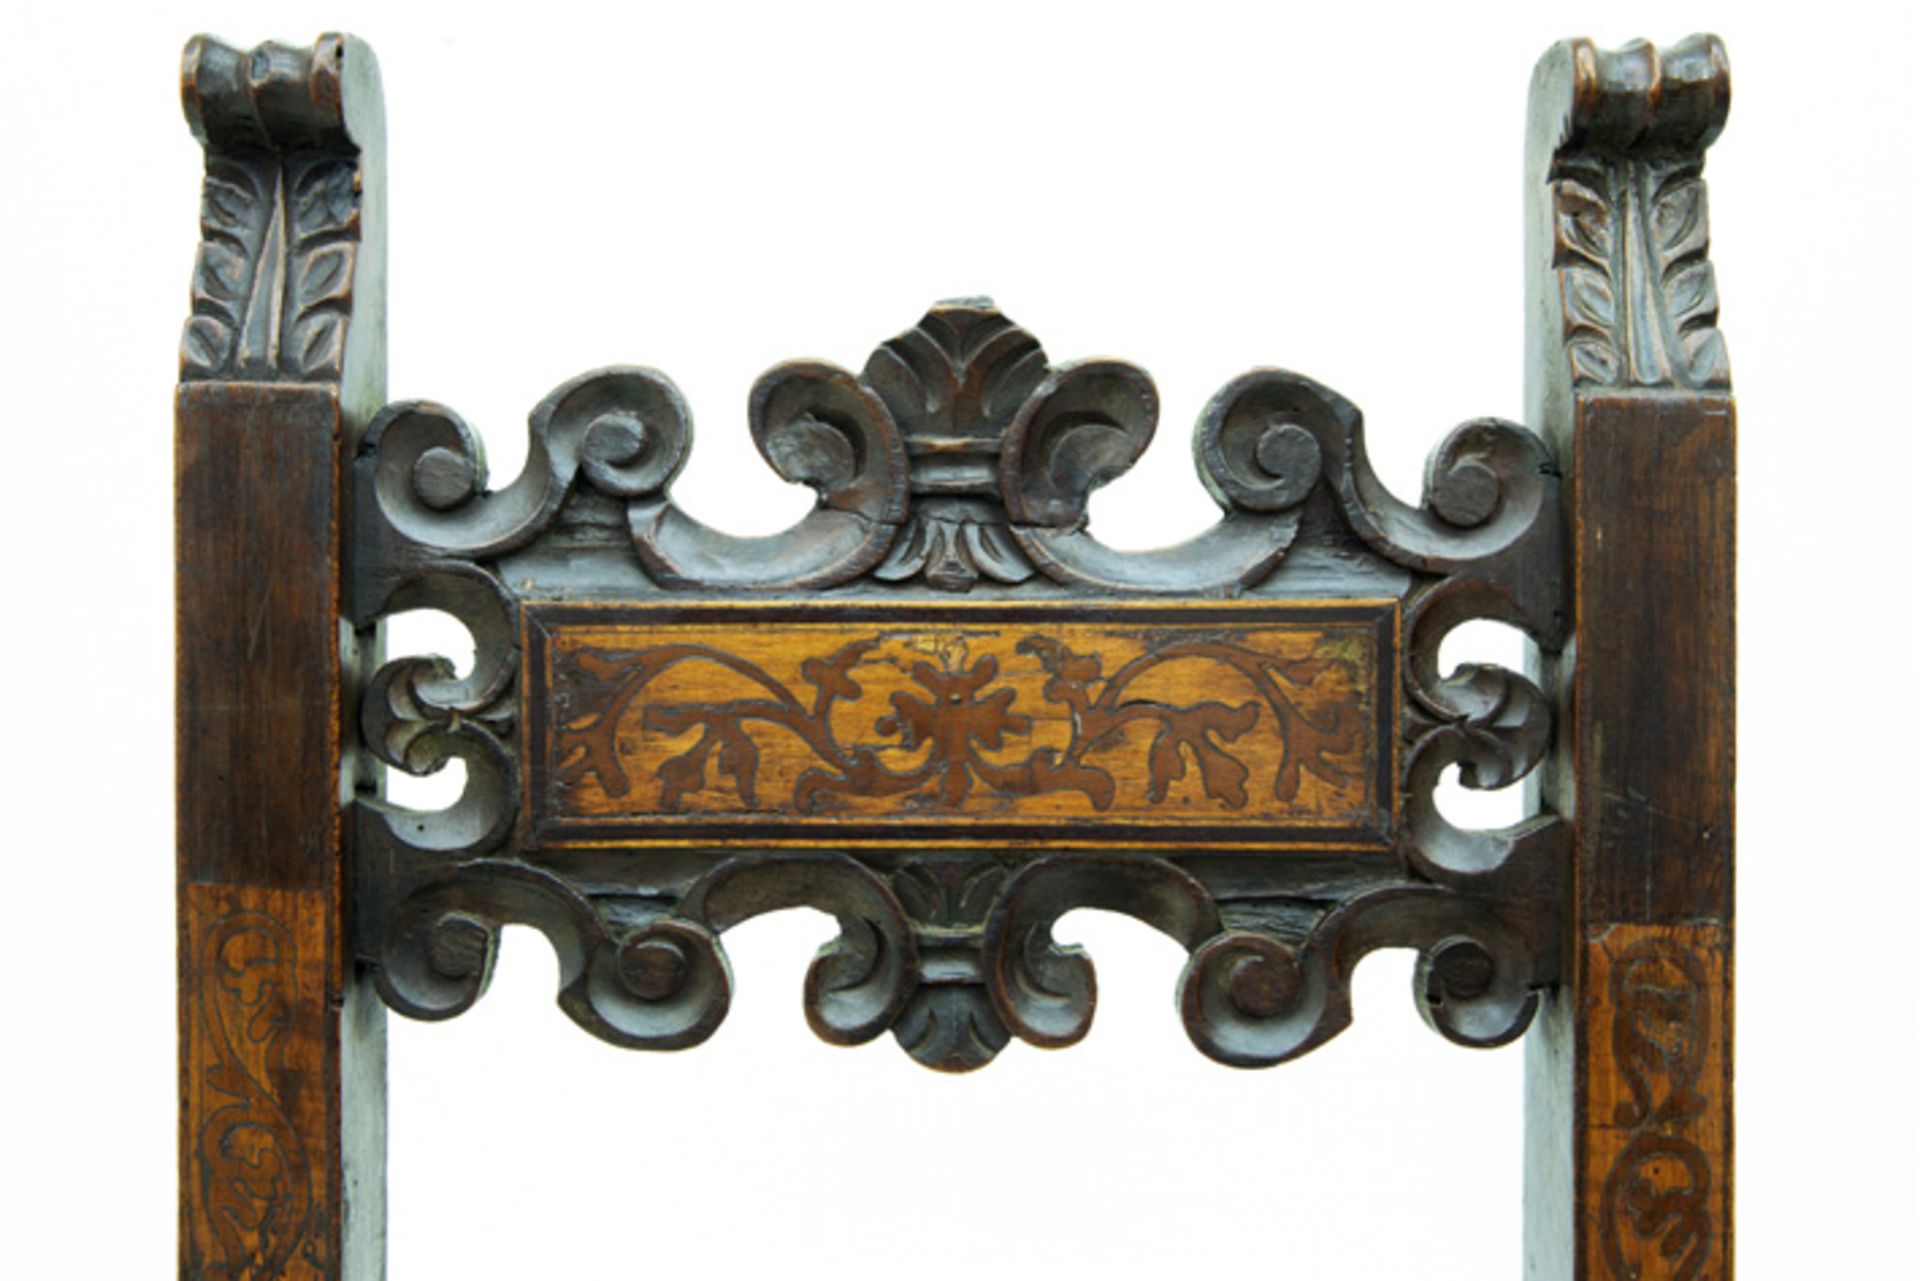 pair of 17th Cent. Italian chairs in walnut adorned with sculptures and inlay || ITALIË - 17° EEUW - Image 3 of 3